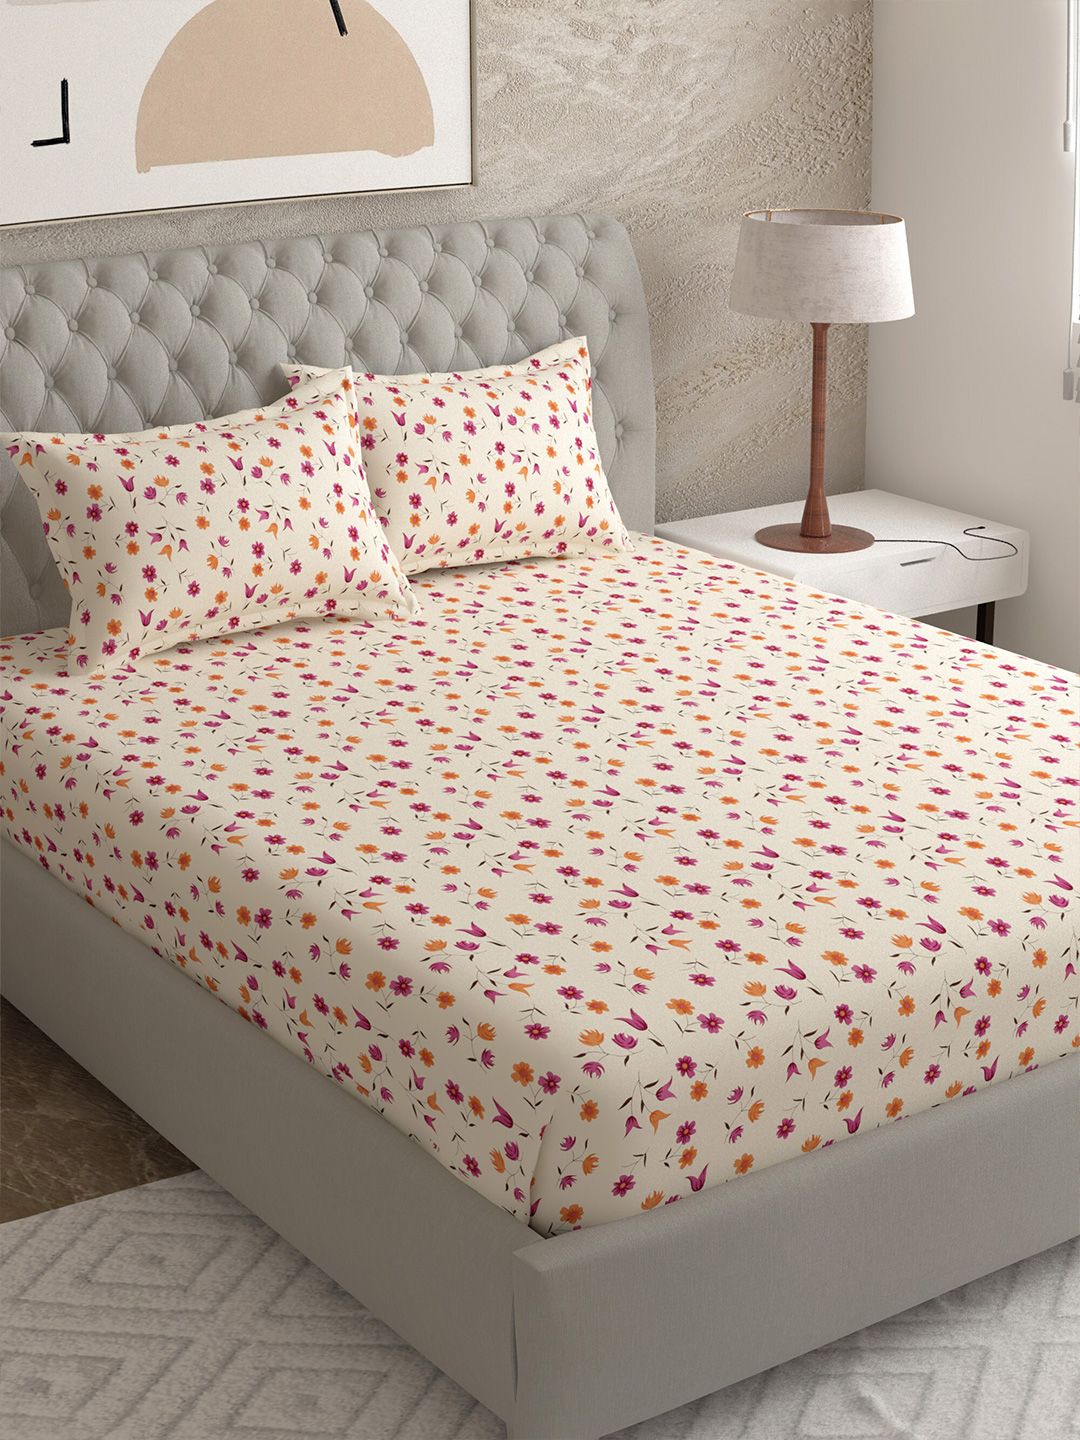 EverHOME Beige & Pink Floral Printed Cotton 144 TC Queen Bedsheet With 2 Pillow Covers Price in India